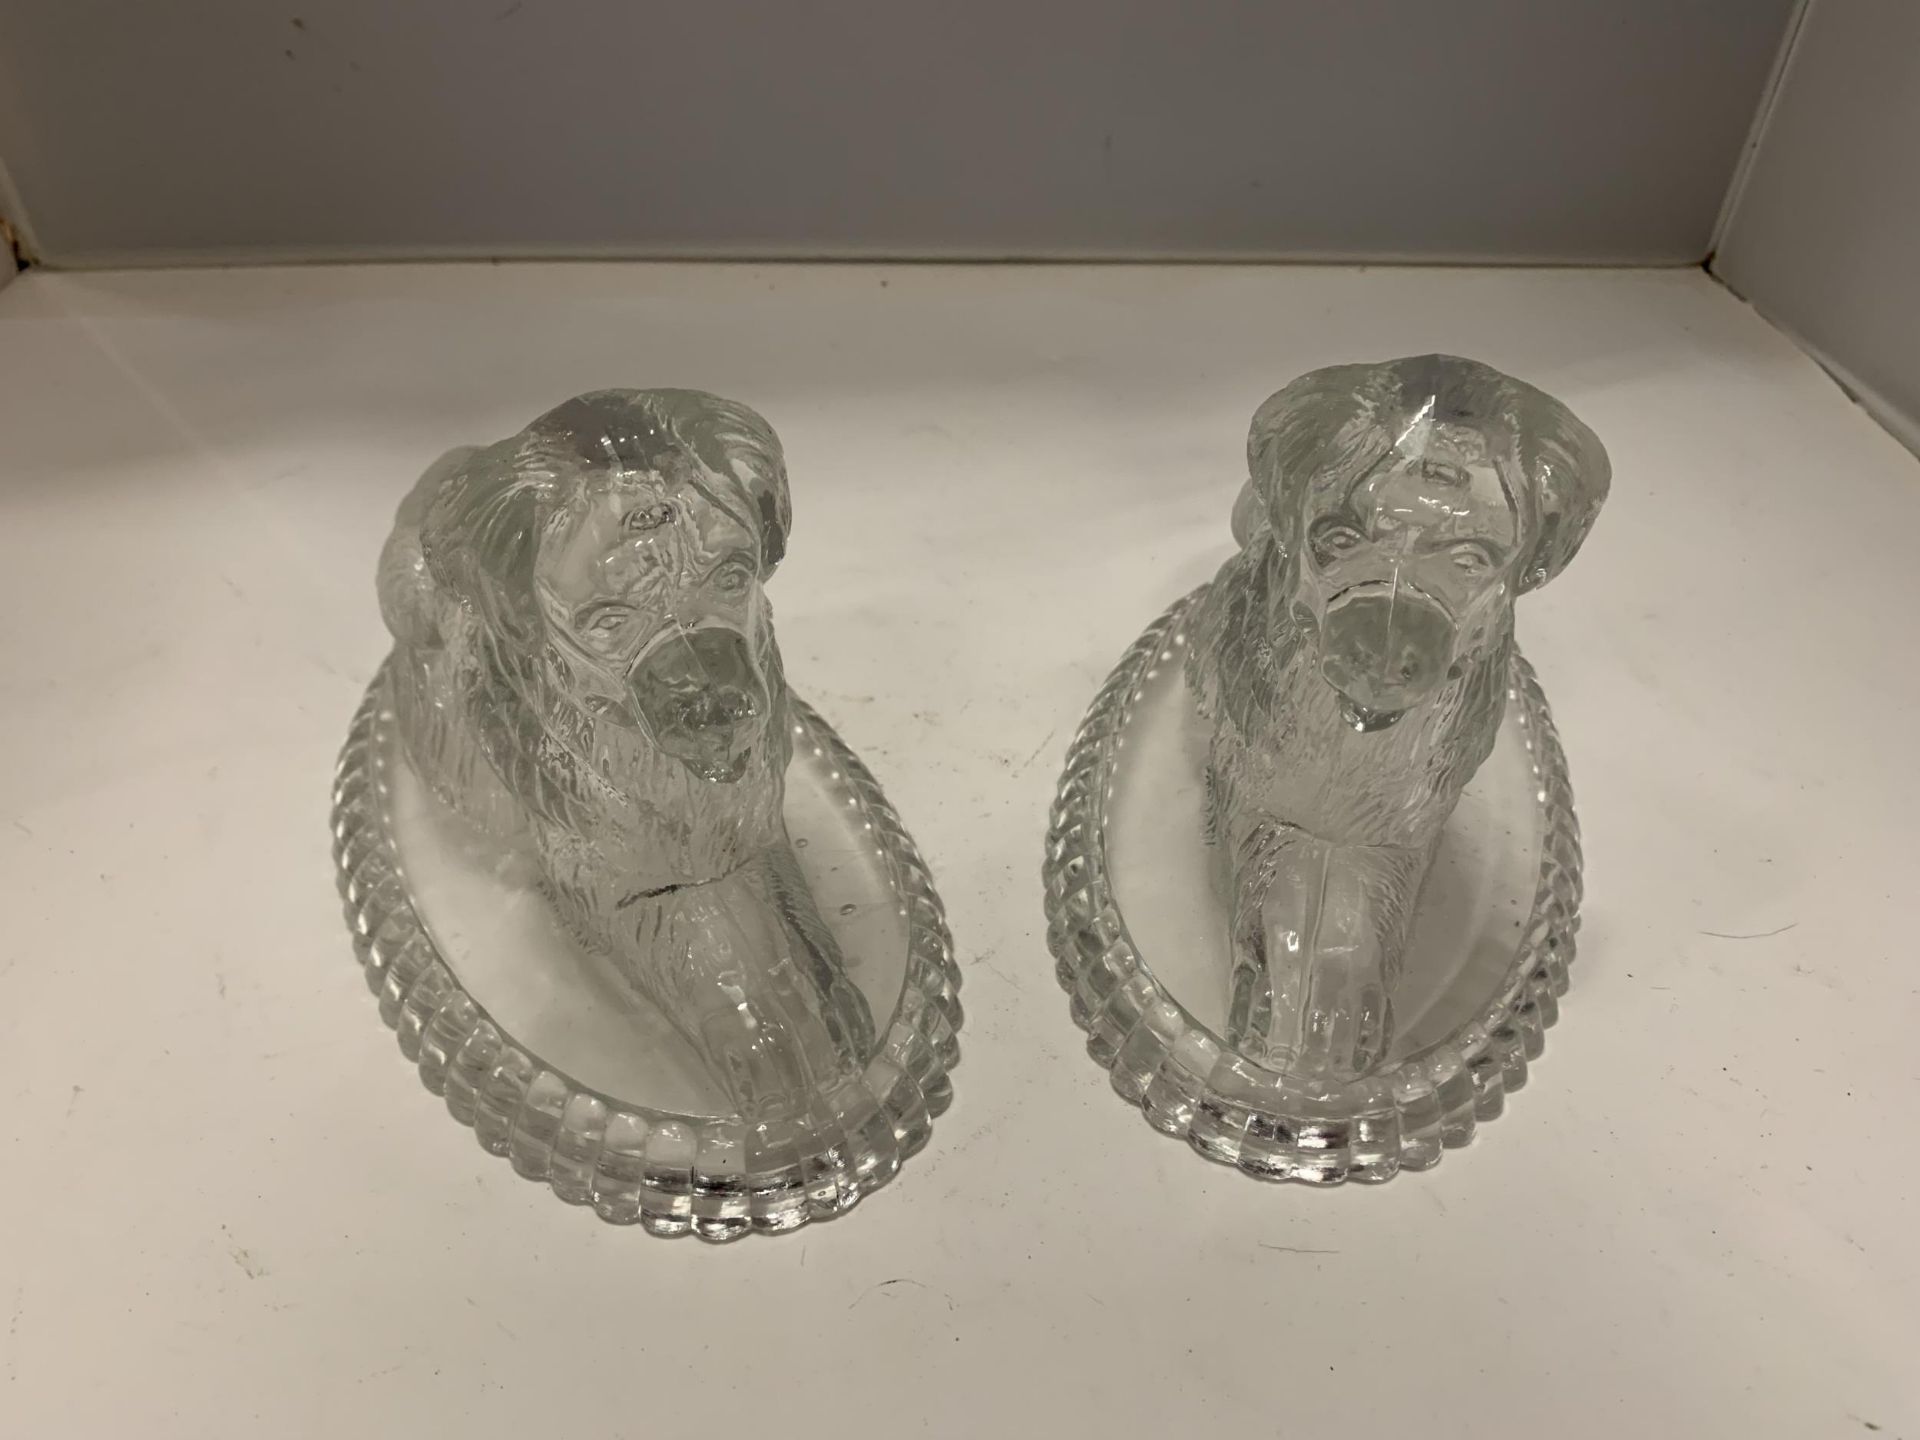 TWO GLASS ORNAMENTAL DOGS, POSSIBLY ST BERNARDS - Image 2 of 3